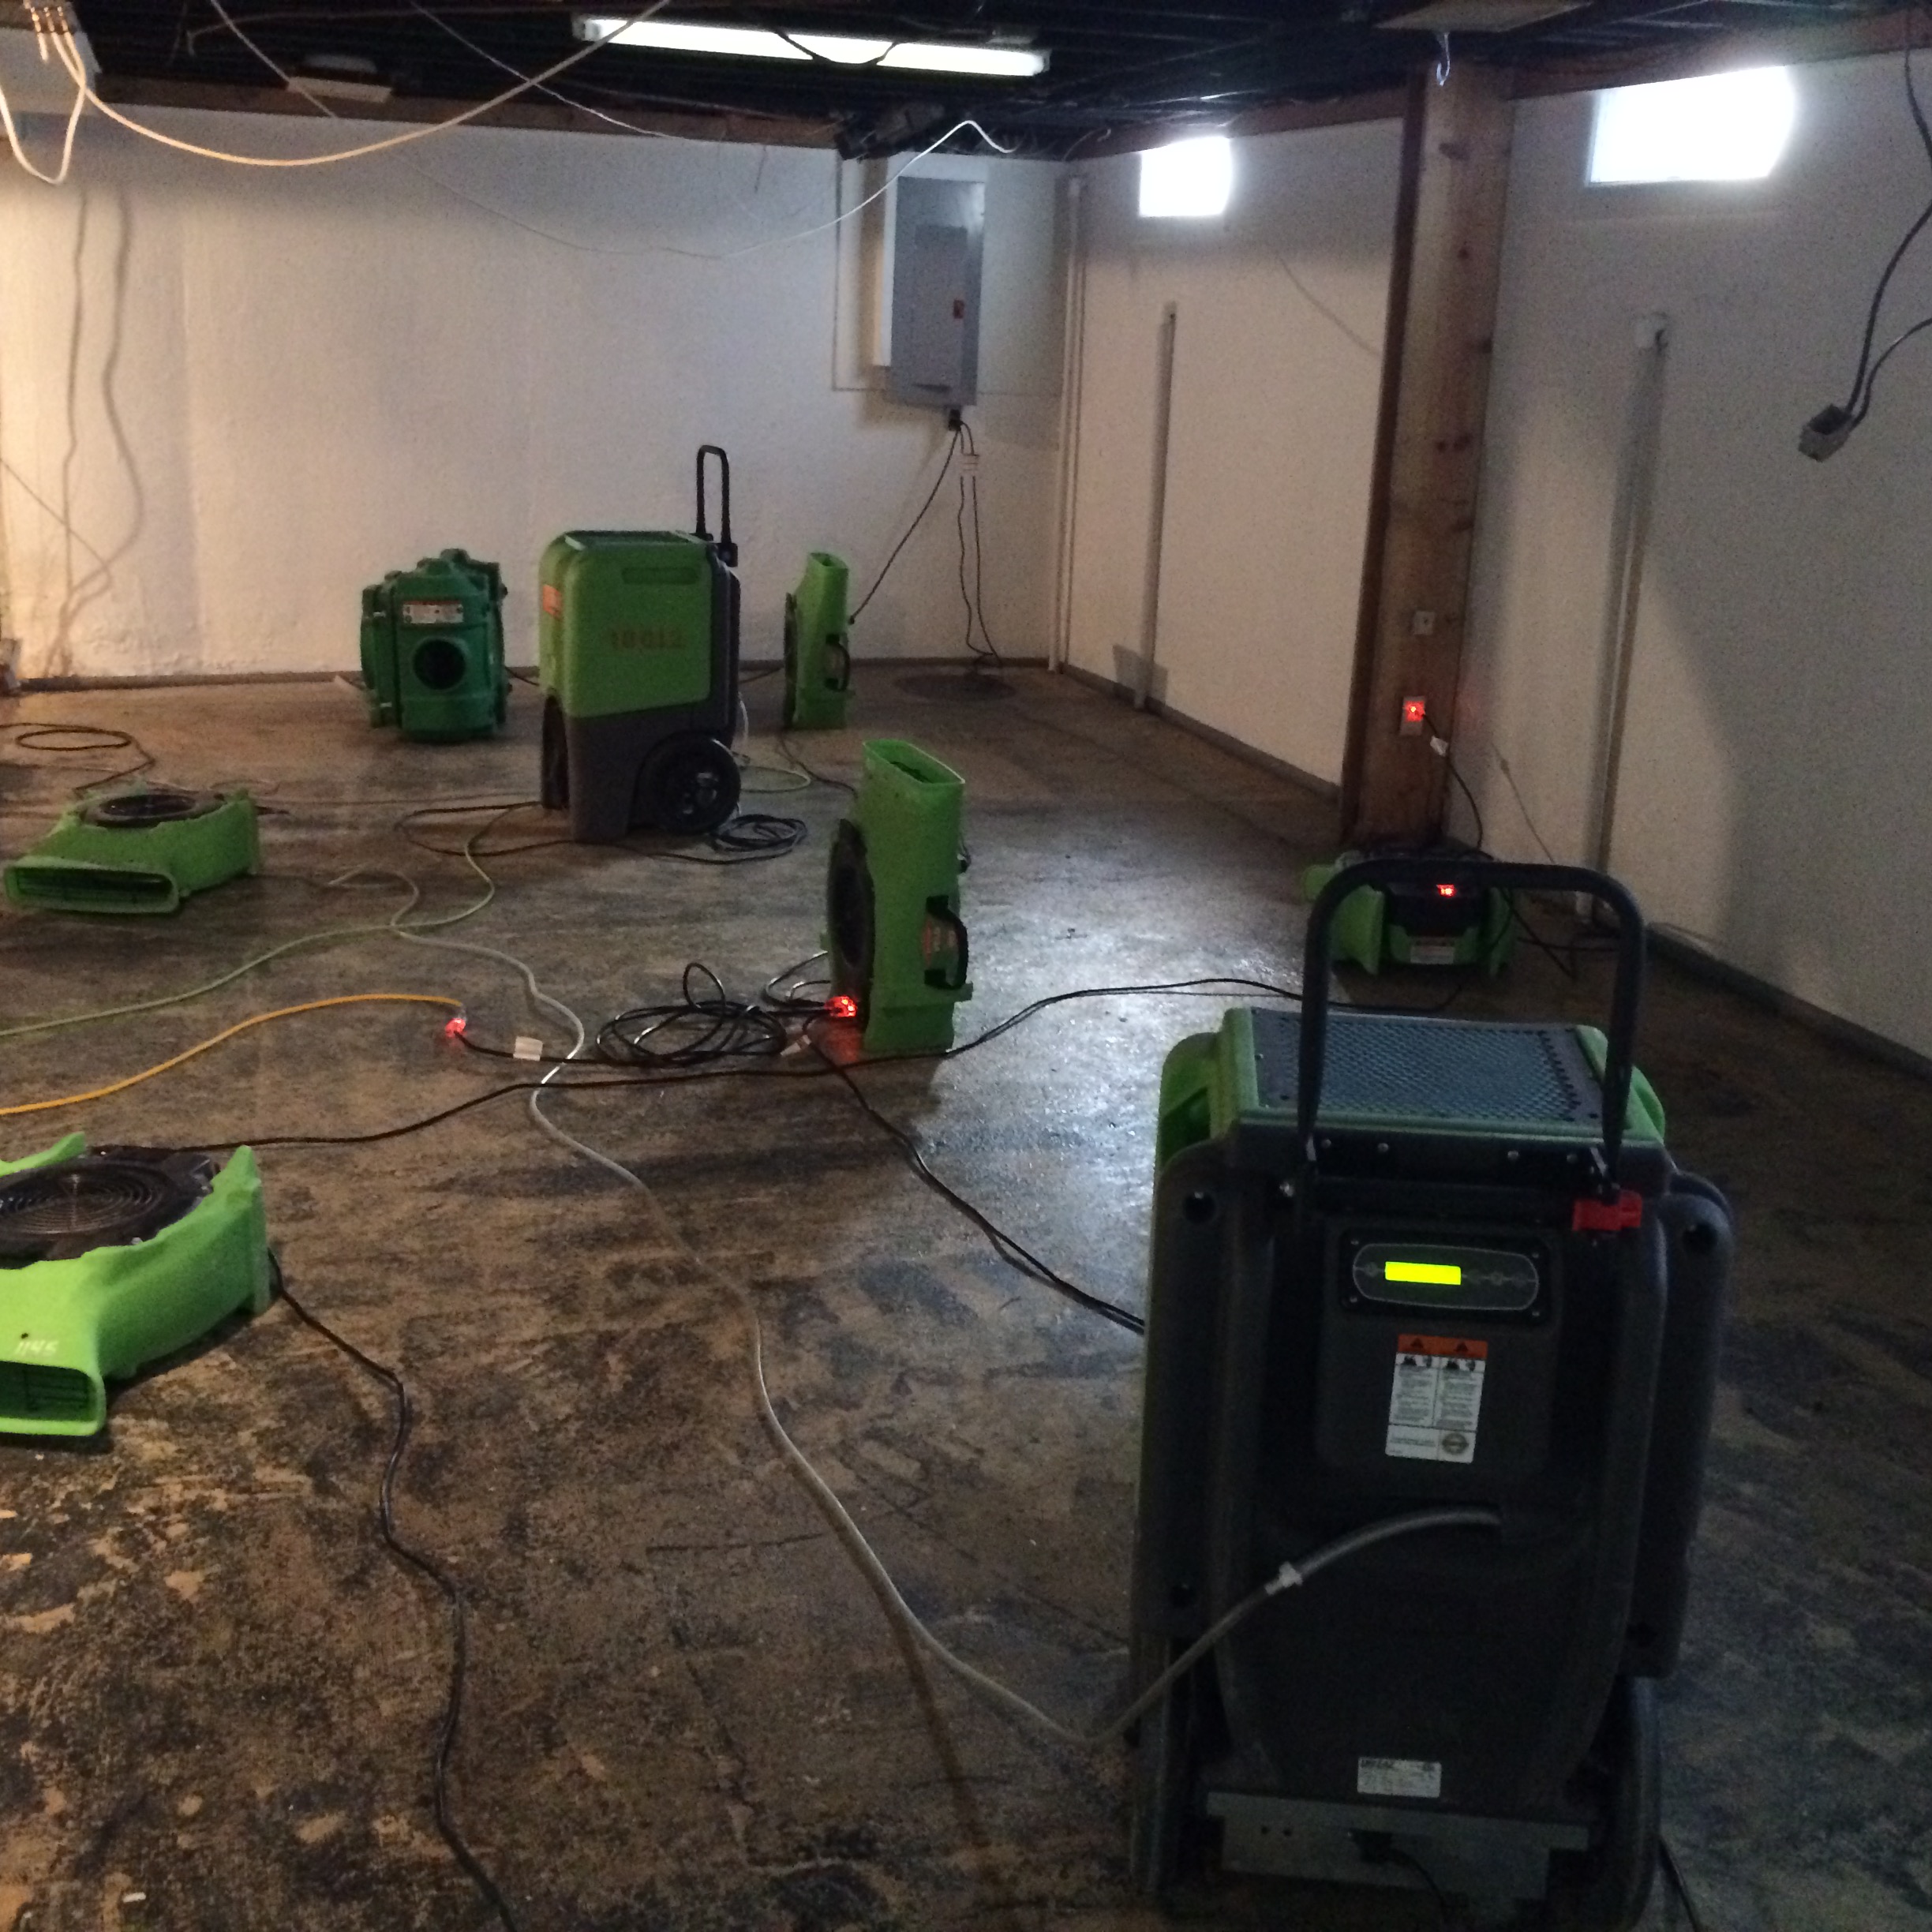 SERVPRO of Affton/Webster Groves has the best team and equipment to make your residential or commercial water damage "Like it never even happened."